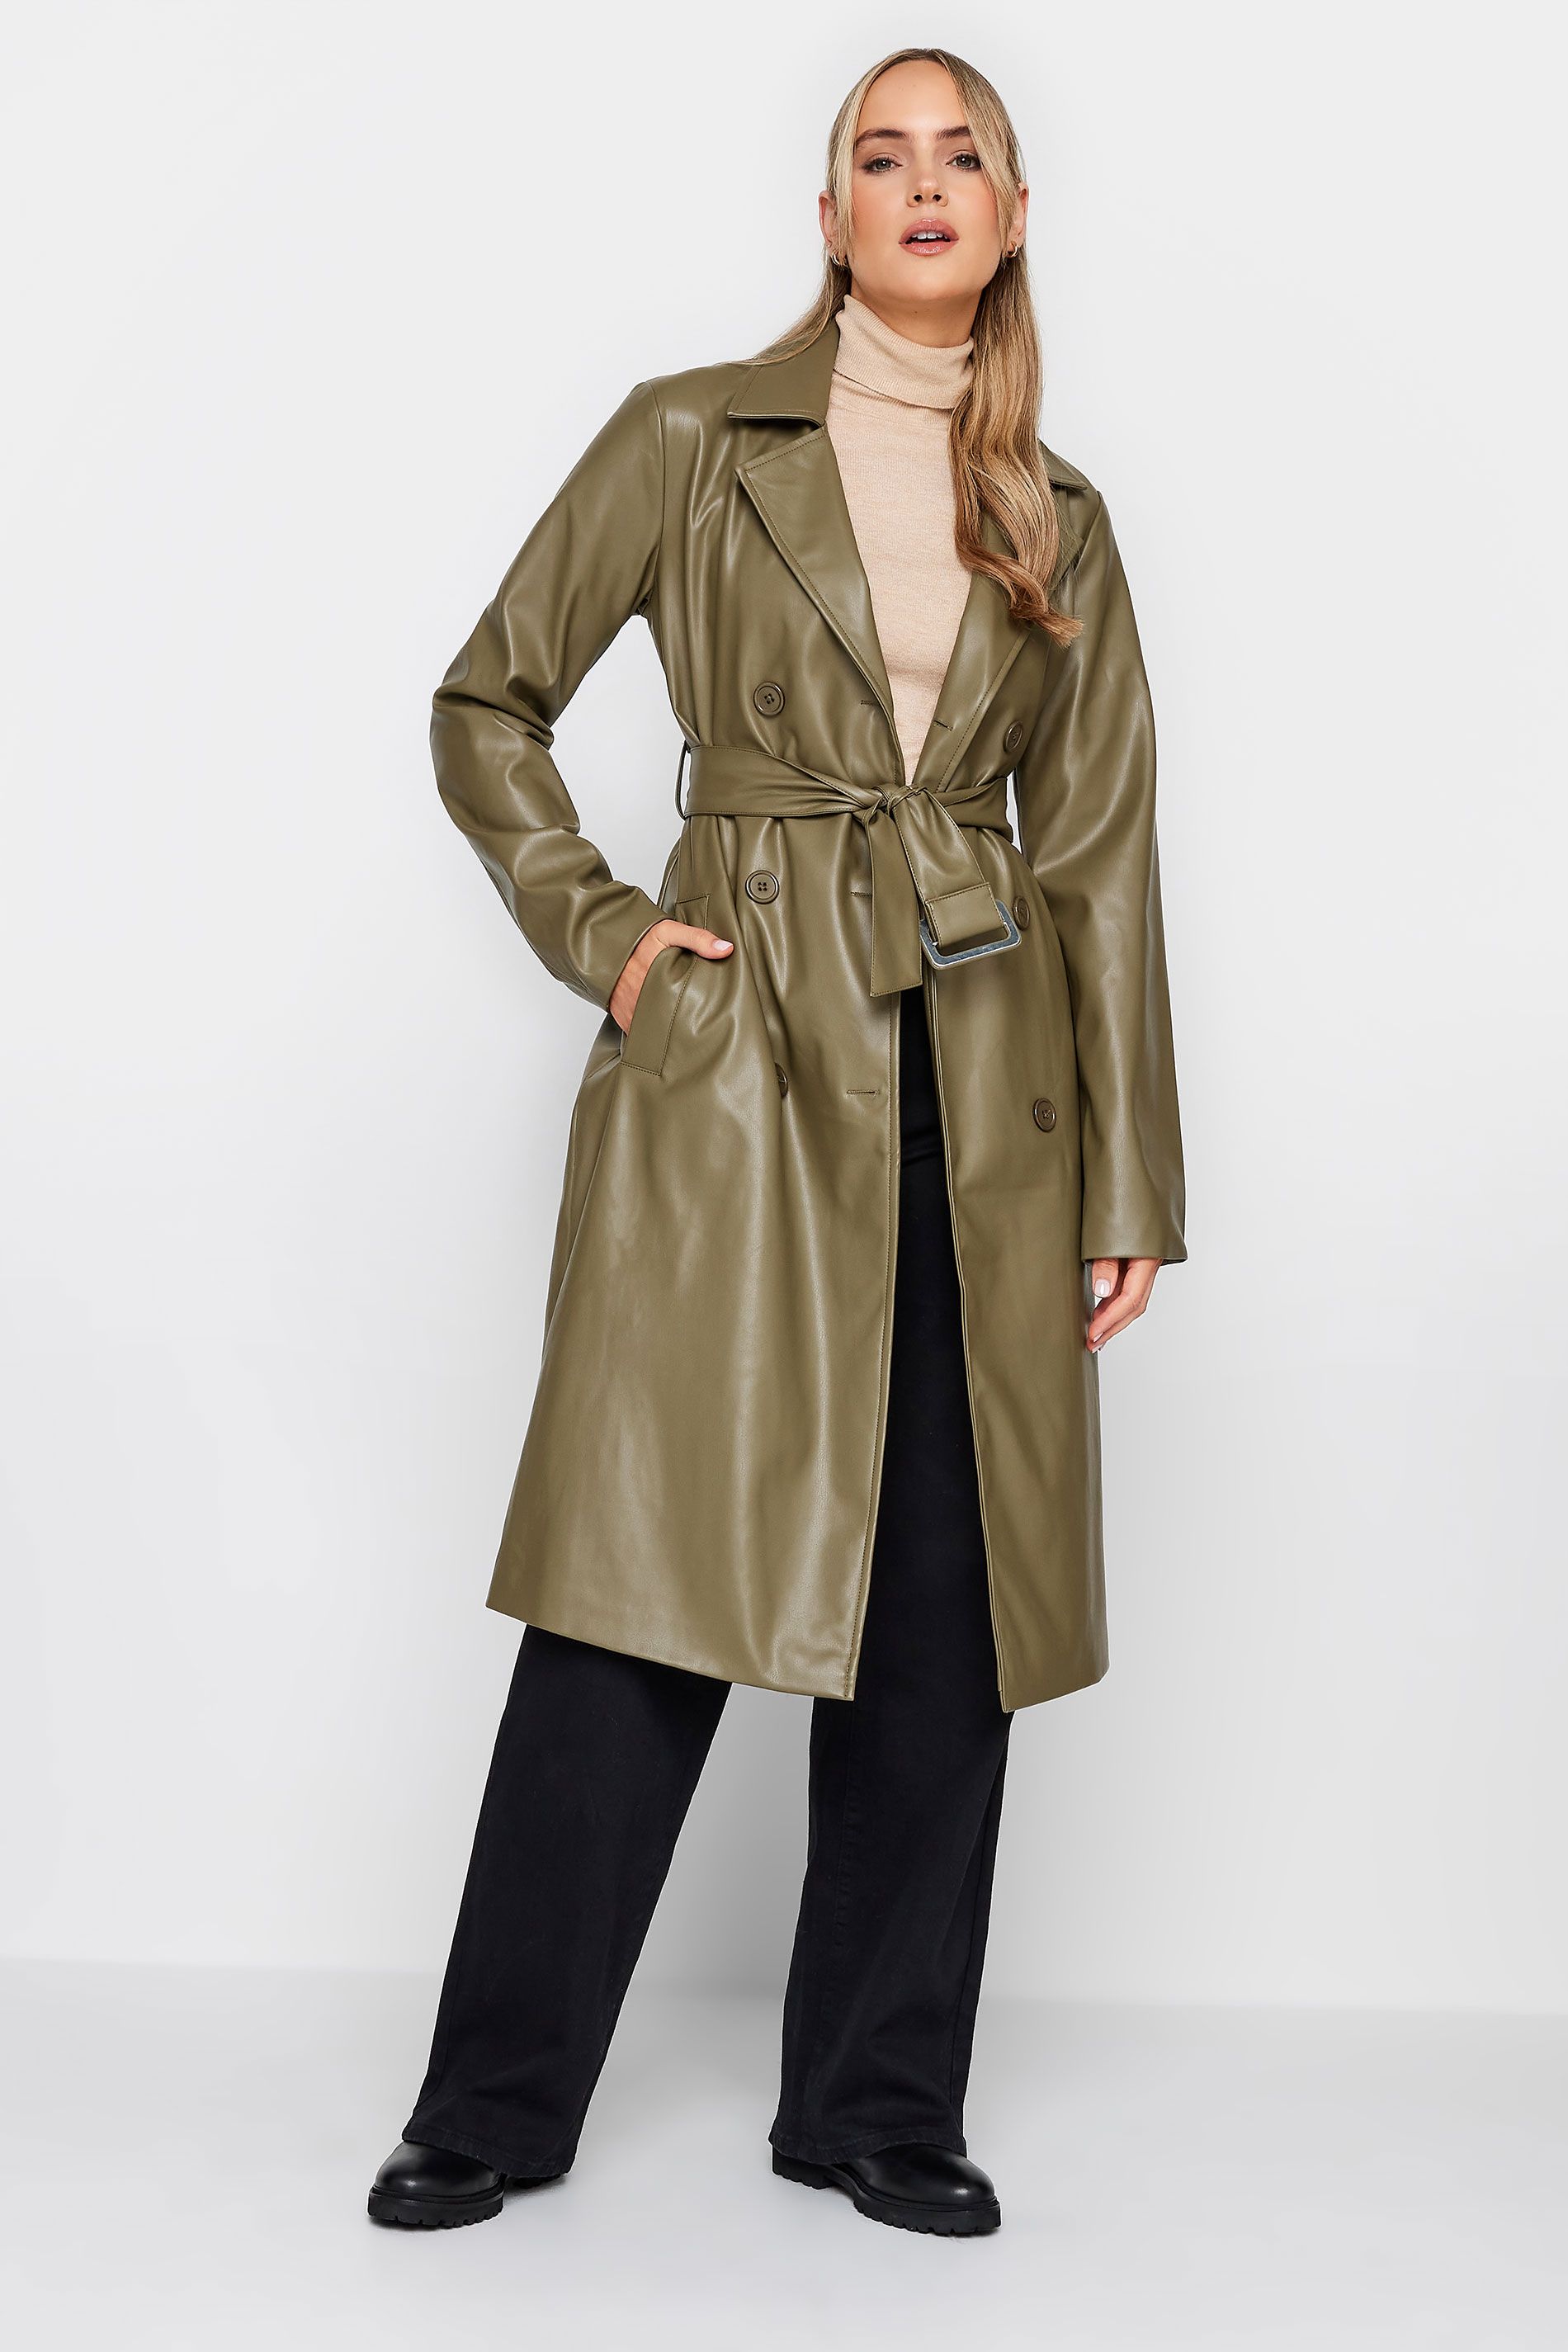 LTS Tall Olive Green Faux Leather Trench Coat | Long Tall Sally